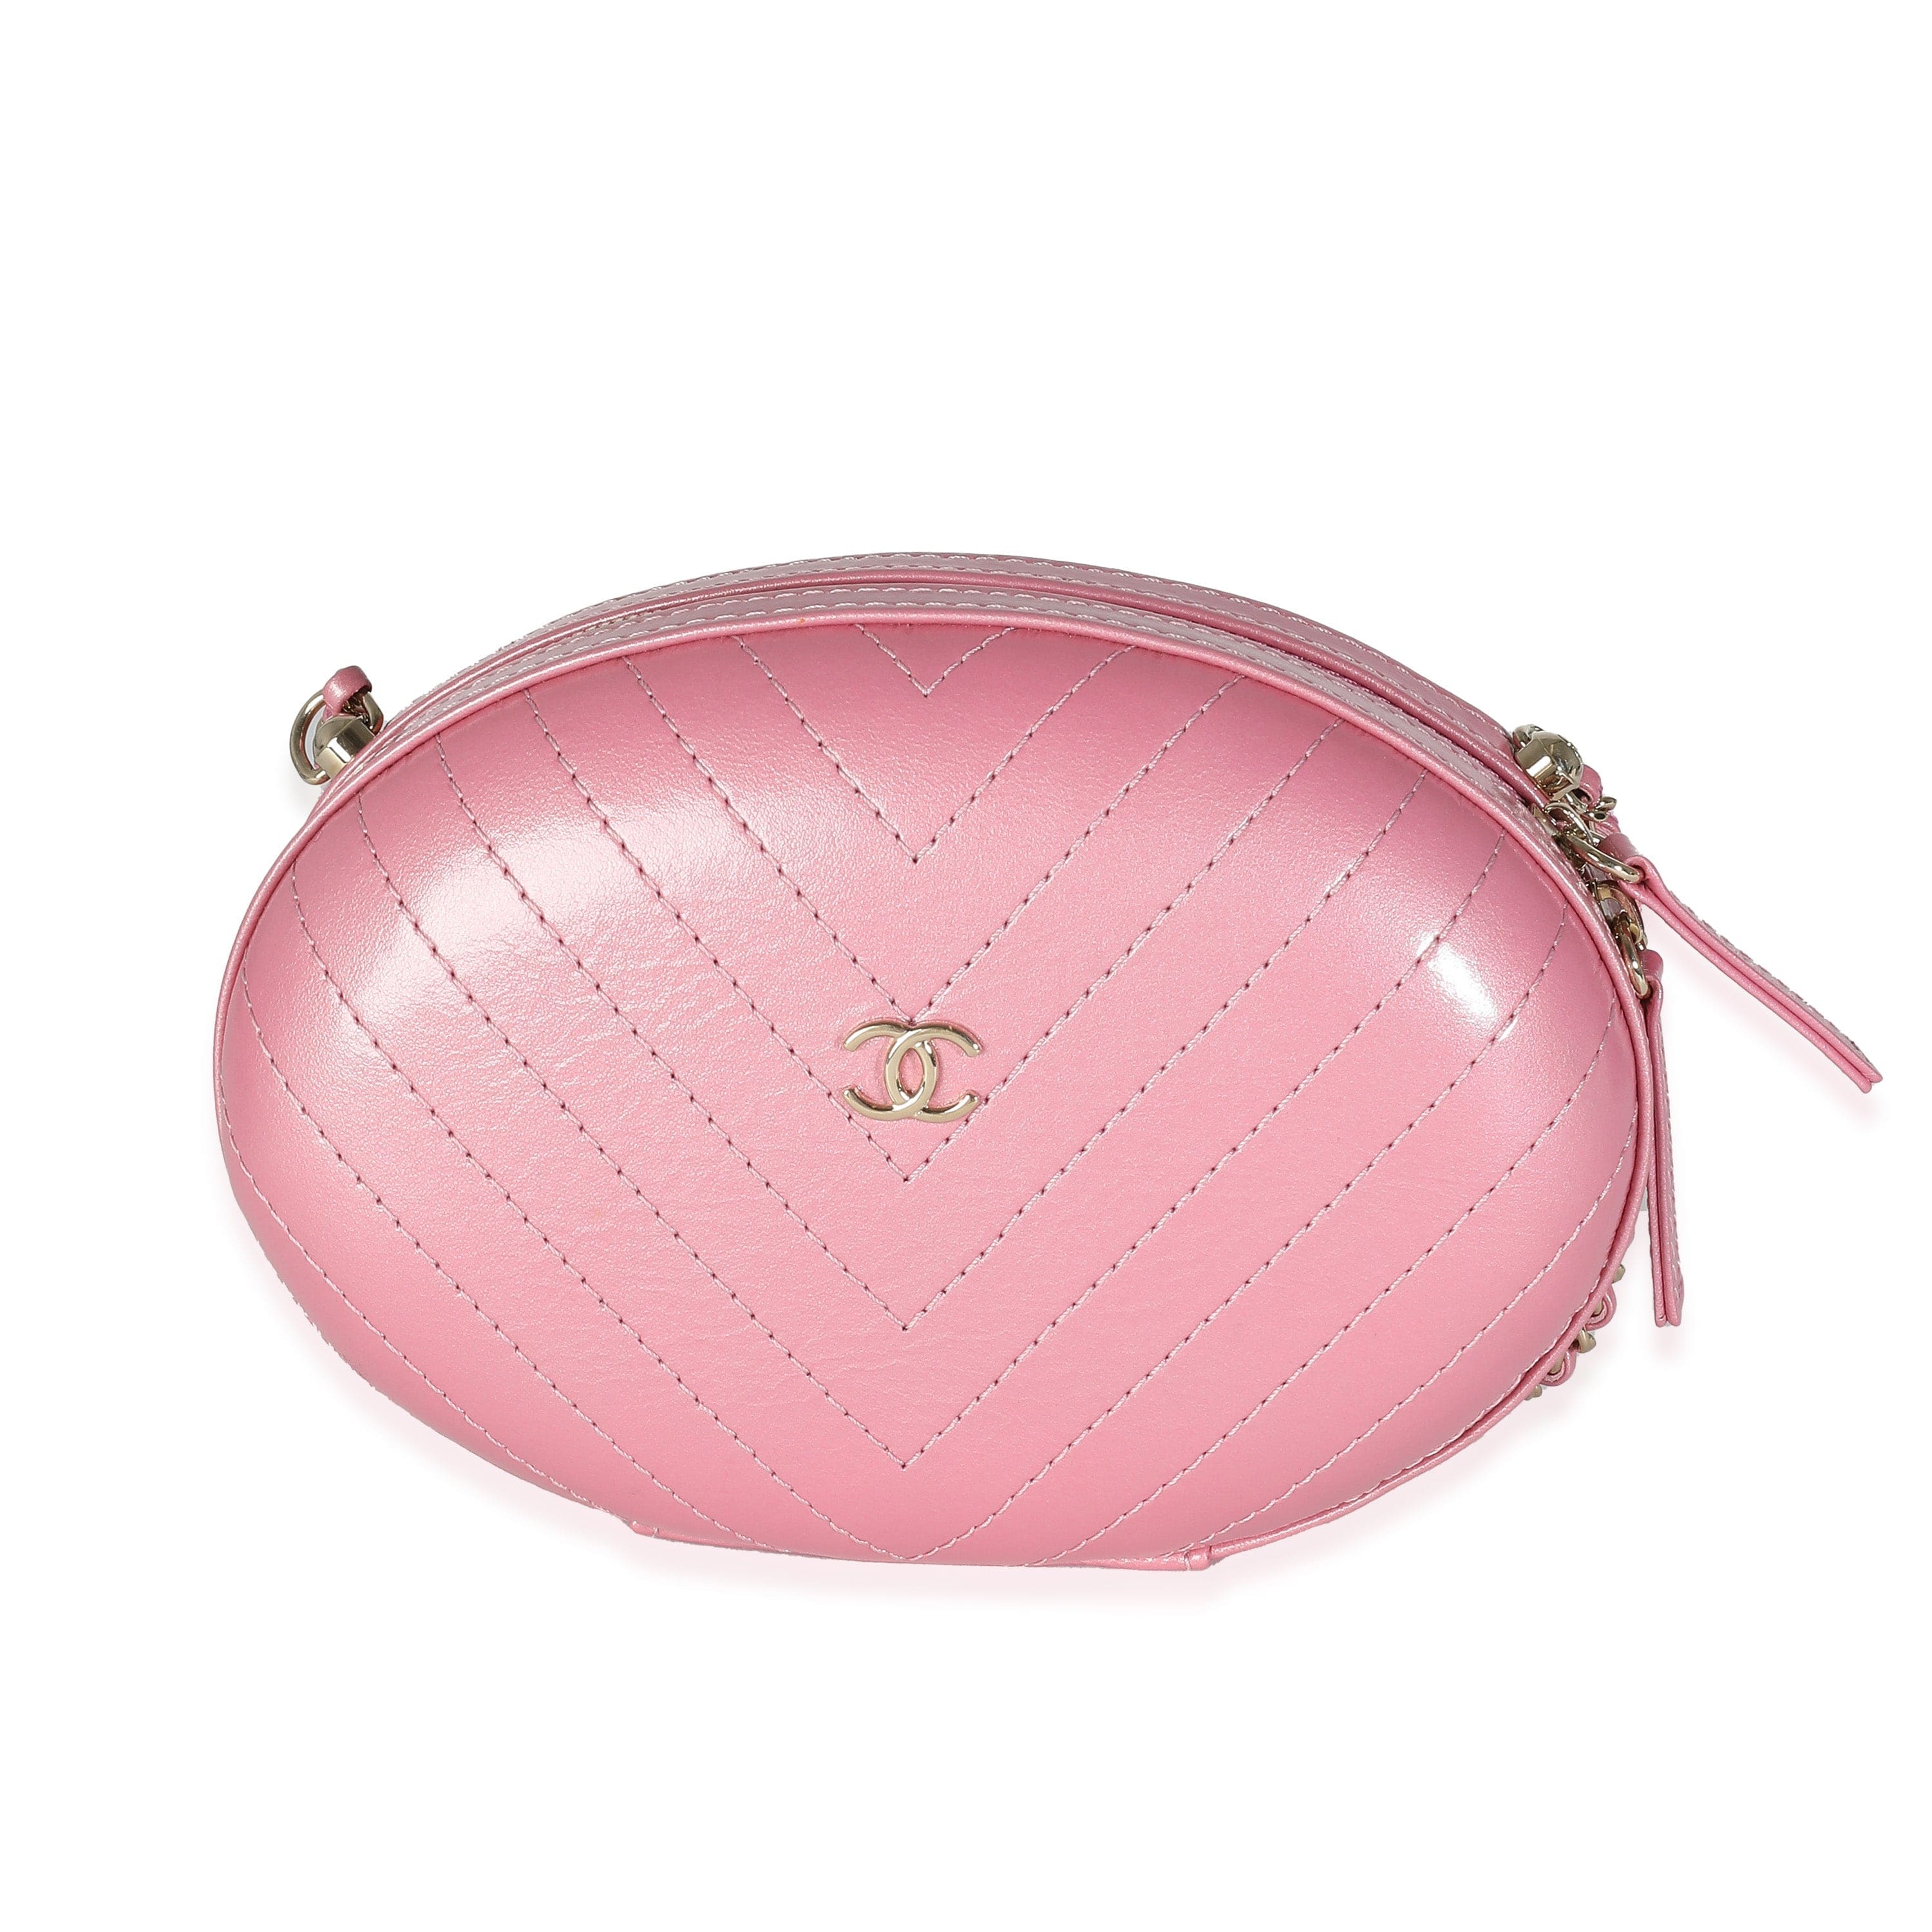 Chanel Chanel Pink Chevron Calfskin Evening Clutch With Chain